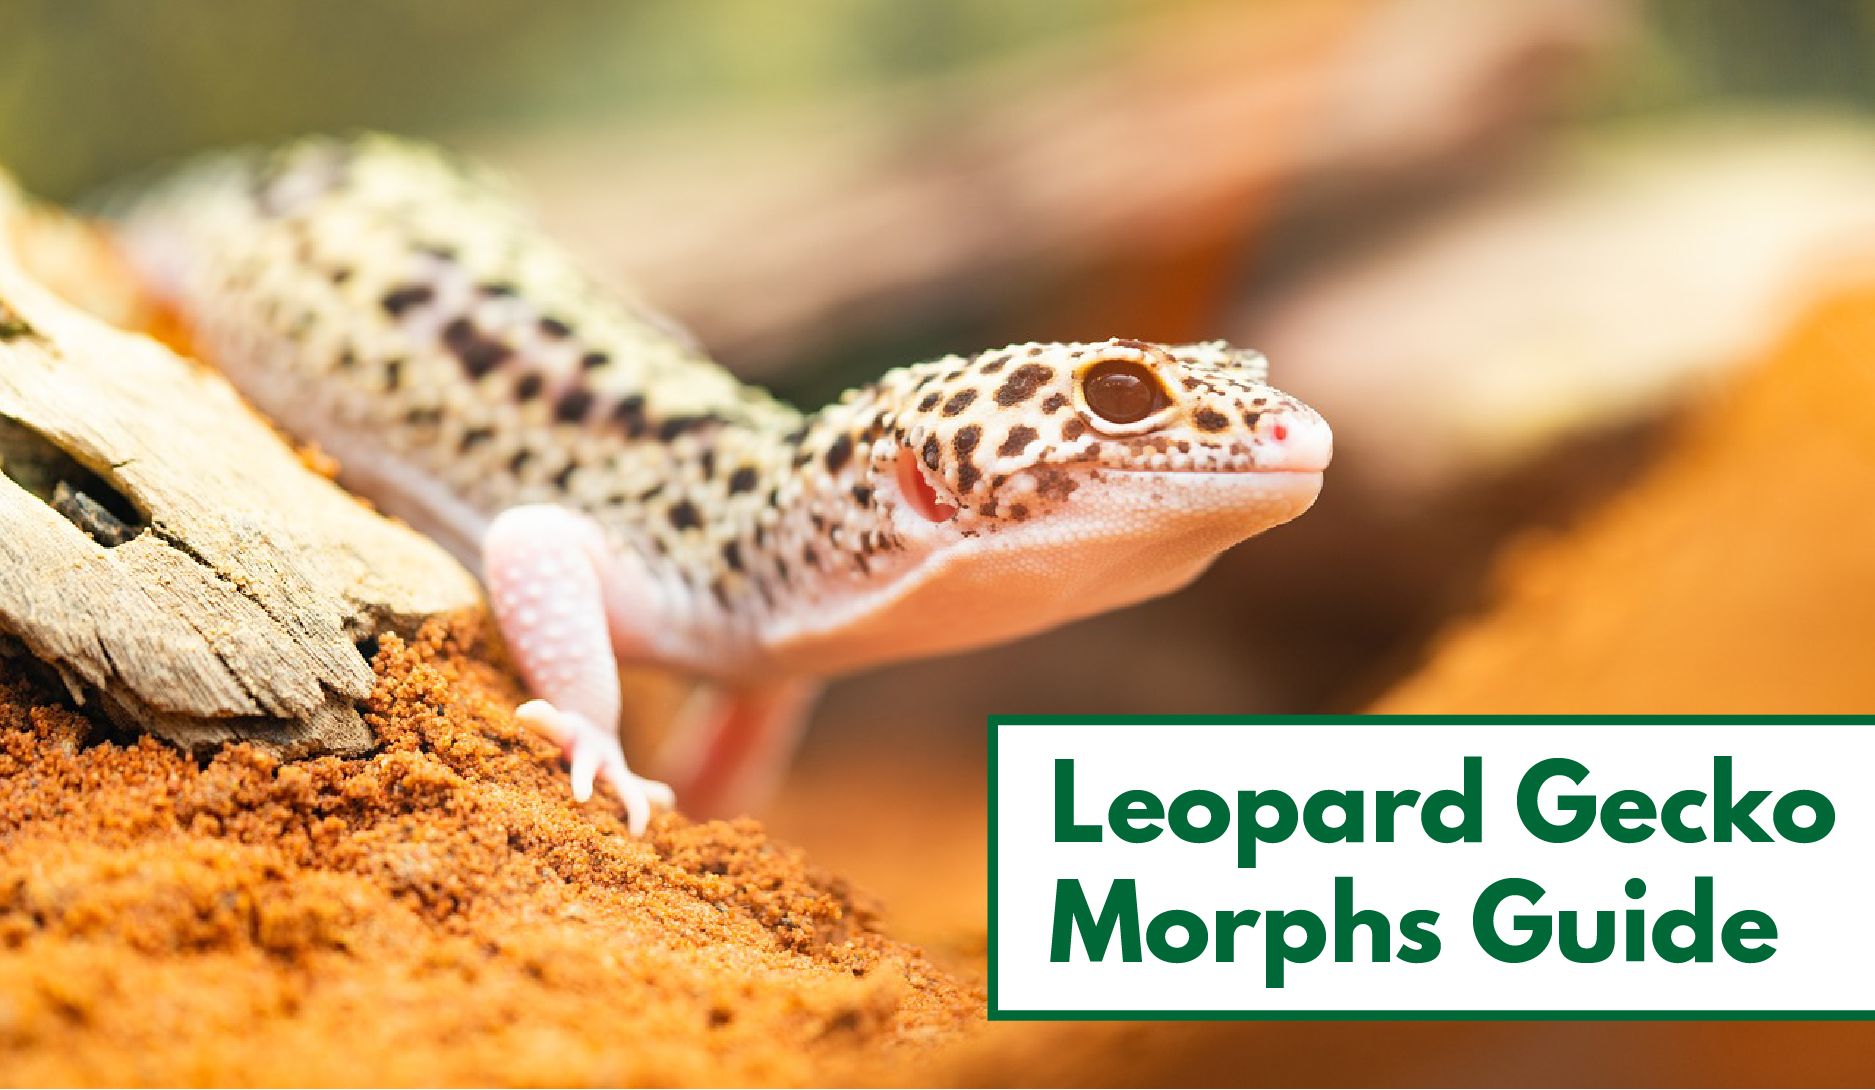 35 Awesome Leopard Gecko Morphs With Pictures The Complete Guide,Melt Chocolate Machine